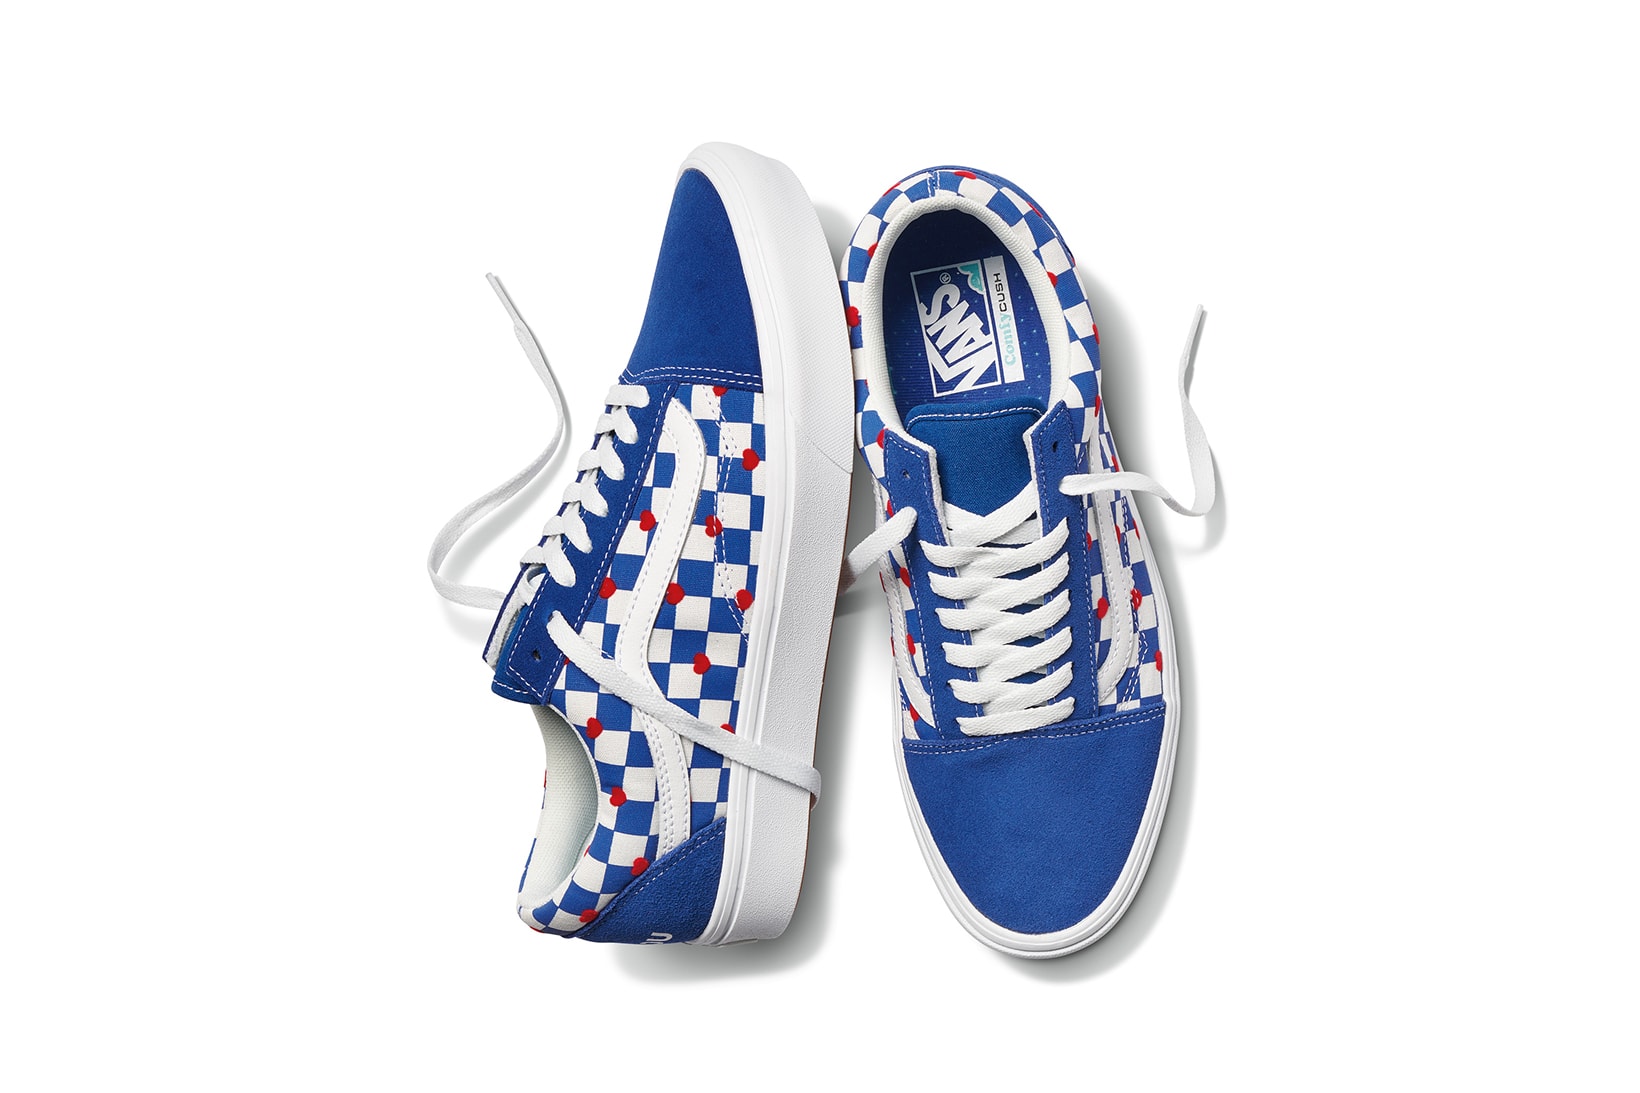 vans comfycush old new skool slip on sneakers autism awareness sensory inclusive charity donation checkered print hearts navy blue white 